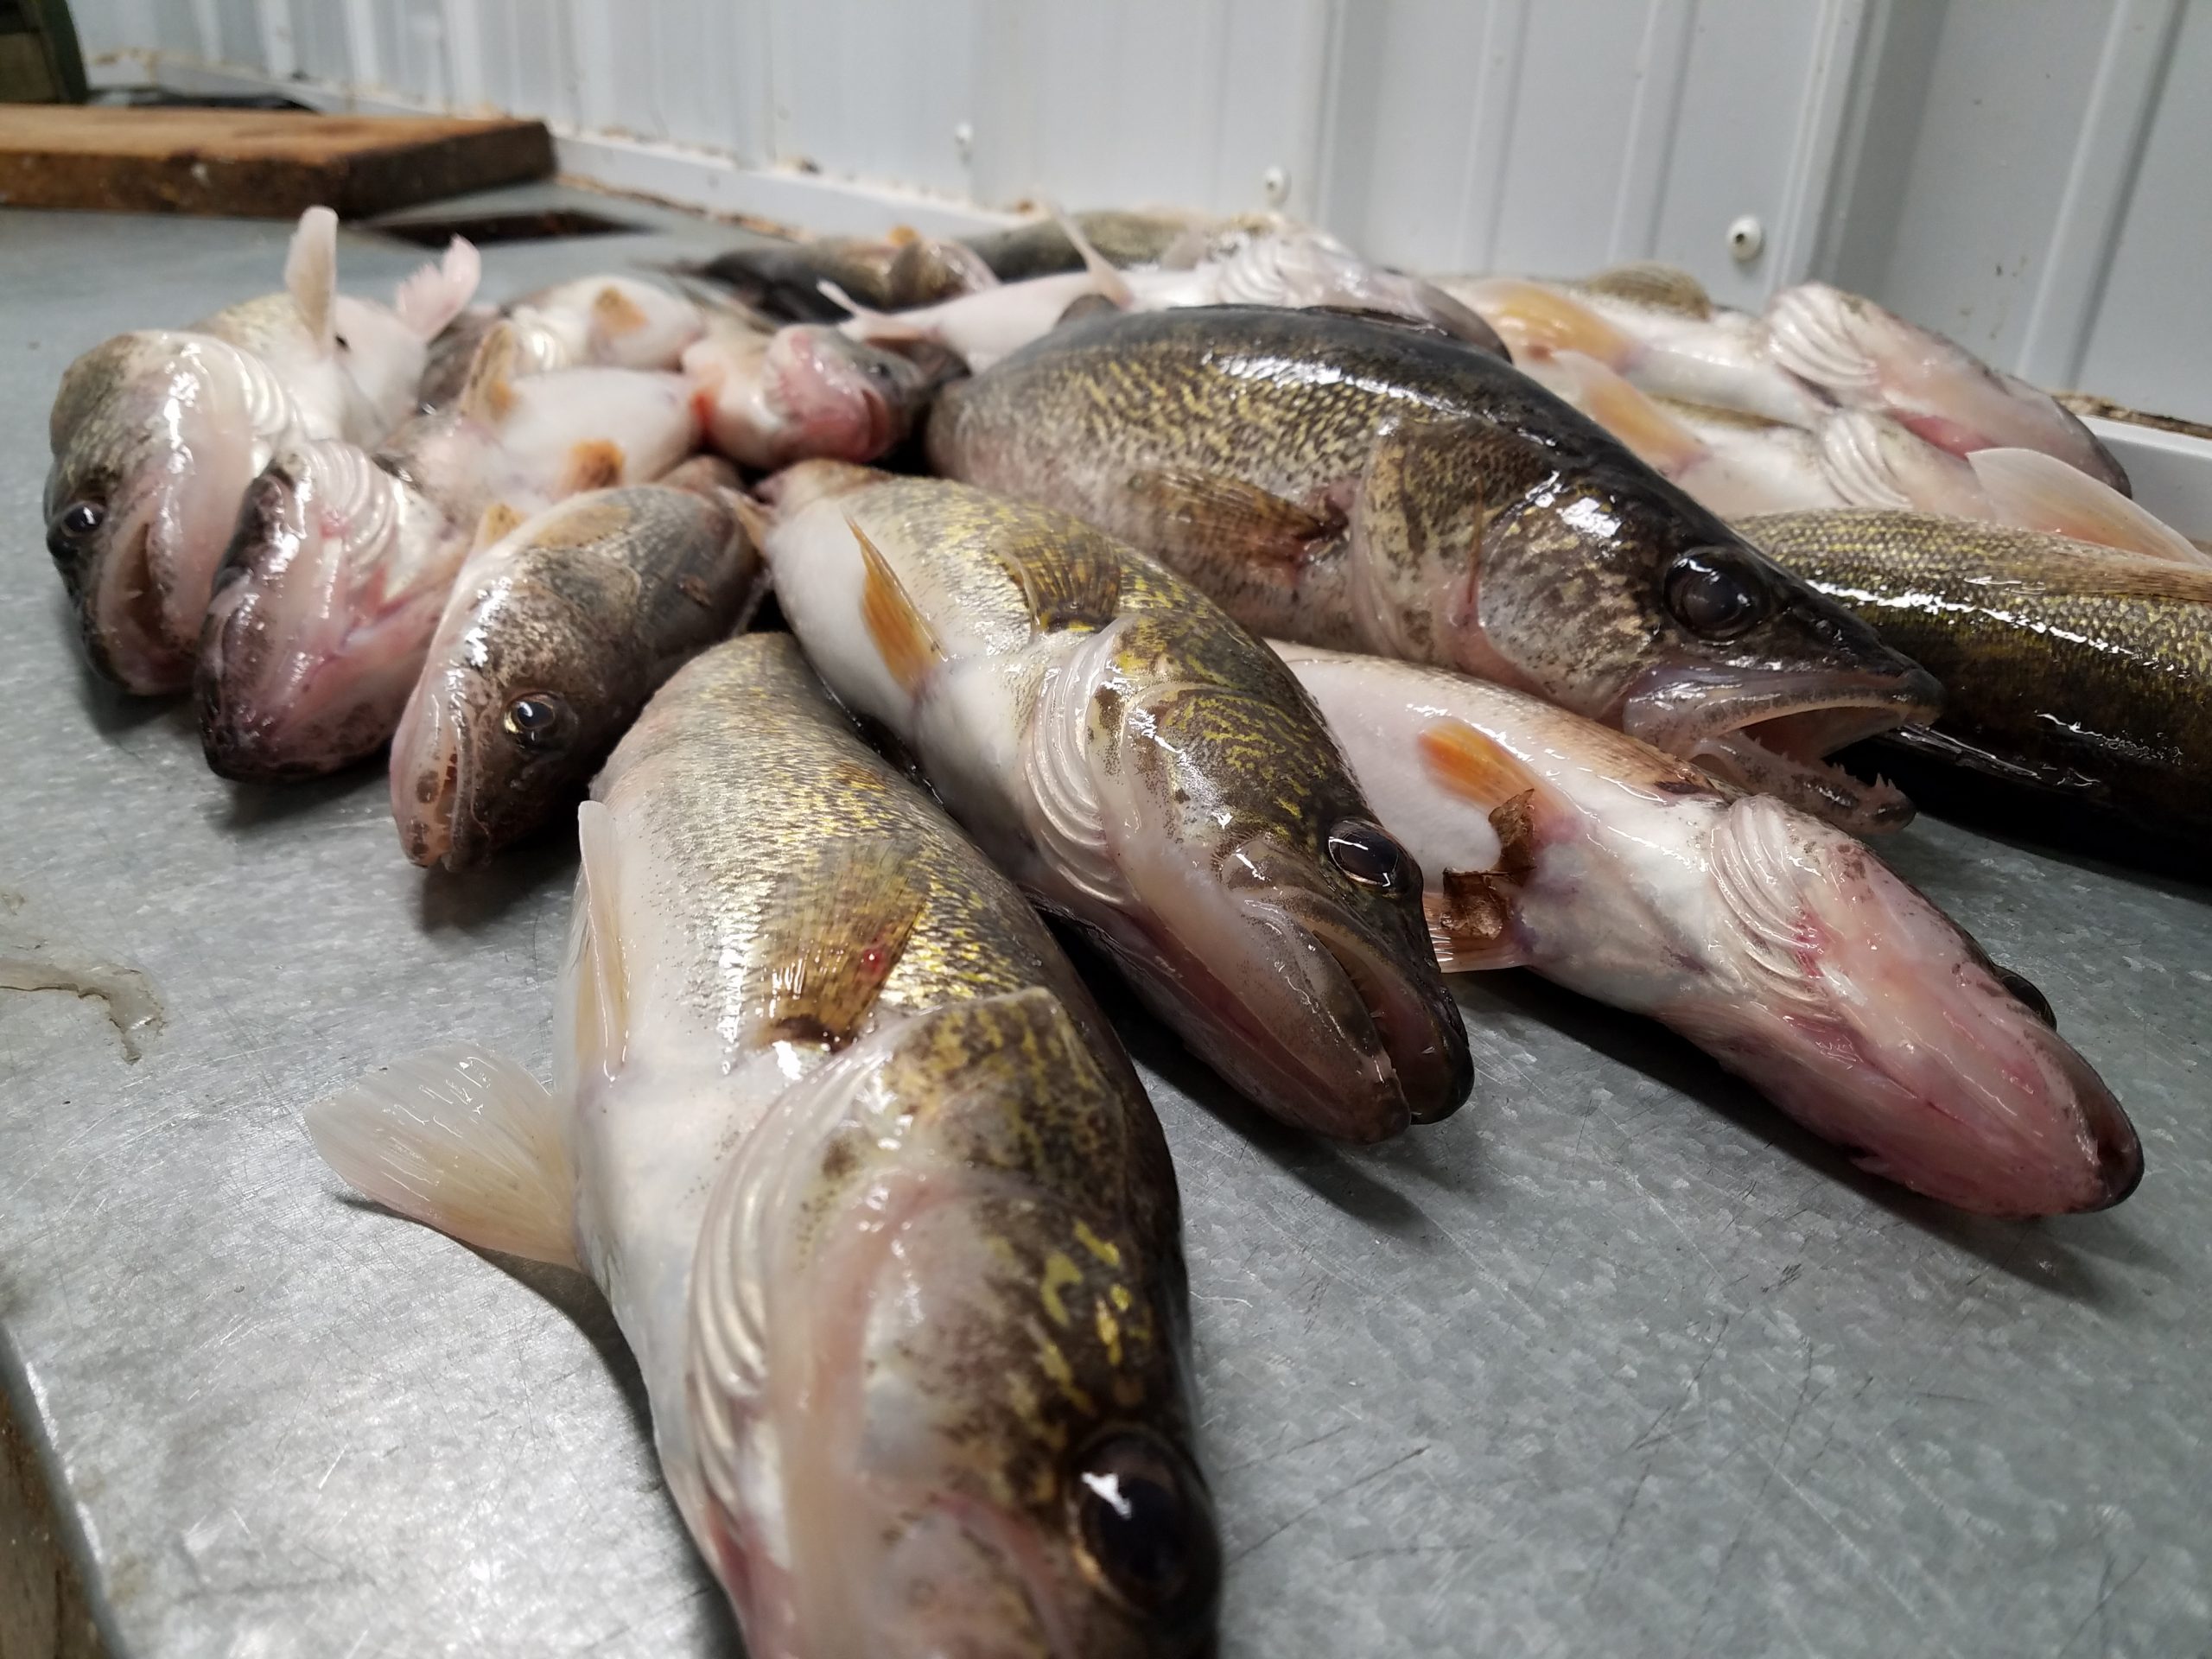 https://lakeofthewoodsmn.com/wp-content/uploads/2019/05/fish-cleaning-table-with-walleyes-sauger-perch-1-scaled.jpg